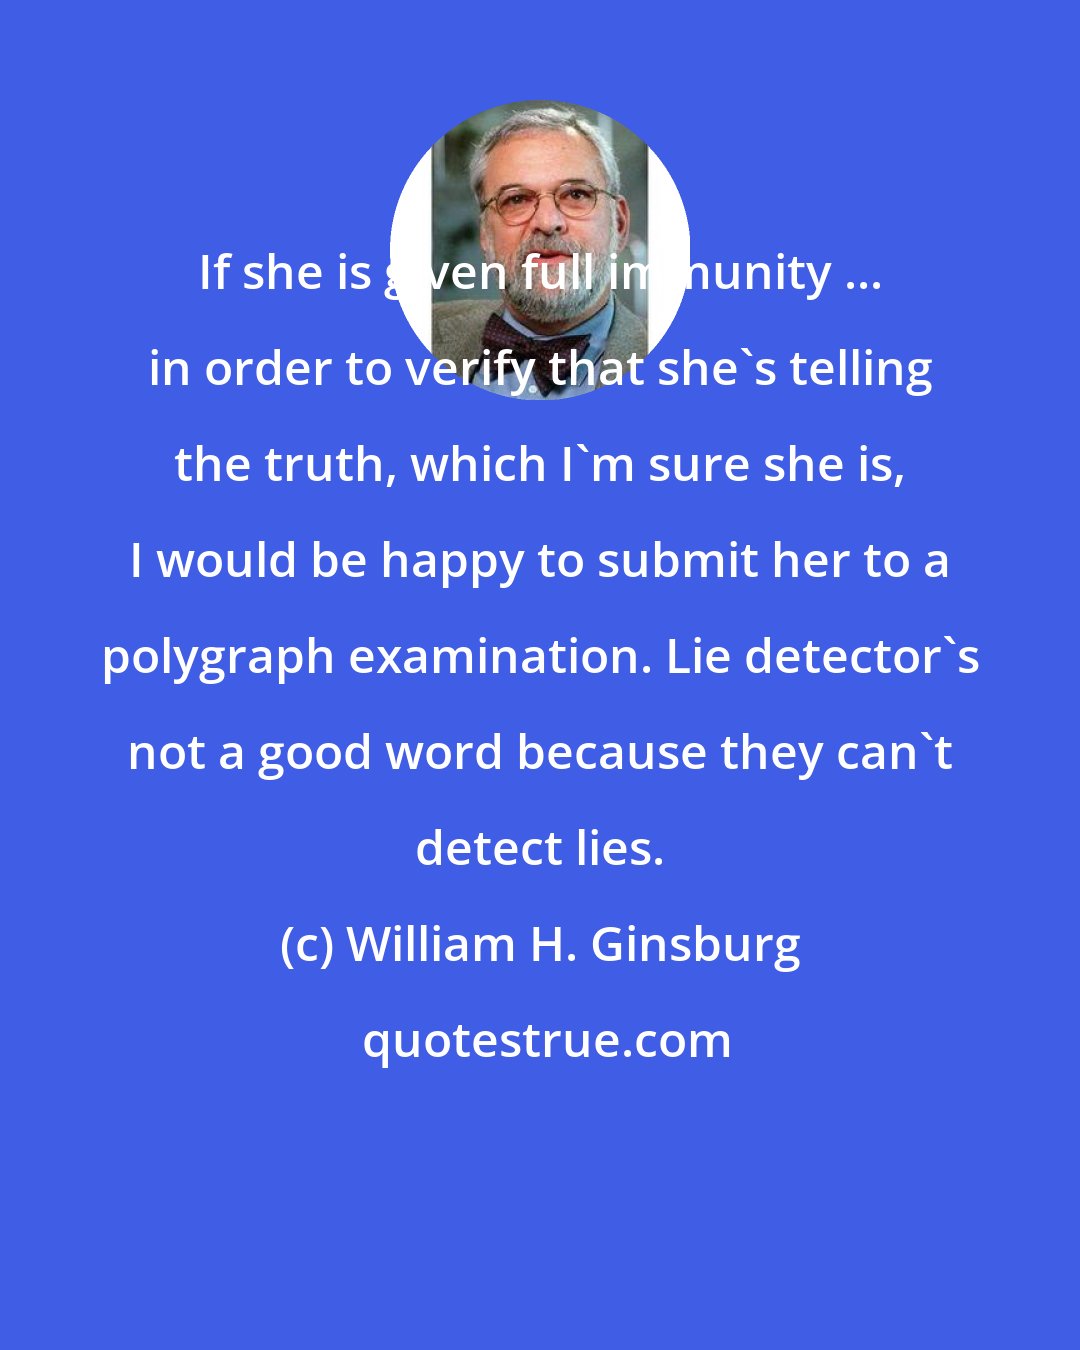 William H. Ginsburg: If she is given full immunity ... in order to verify that she's telling the truth, which I'm sure she is, I would be happy to submit her to a polygraph examination. Lie detector's not a good word because they can't detect lies.